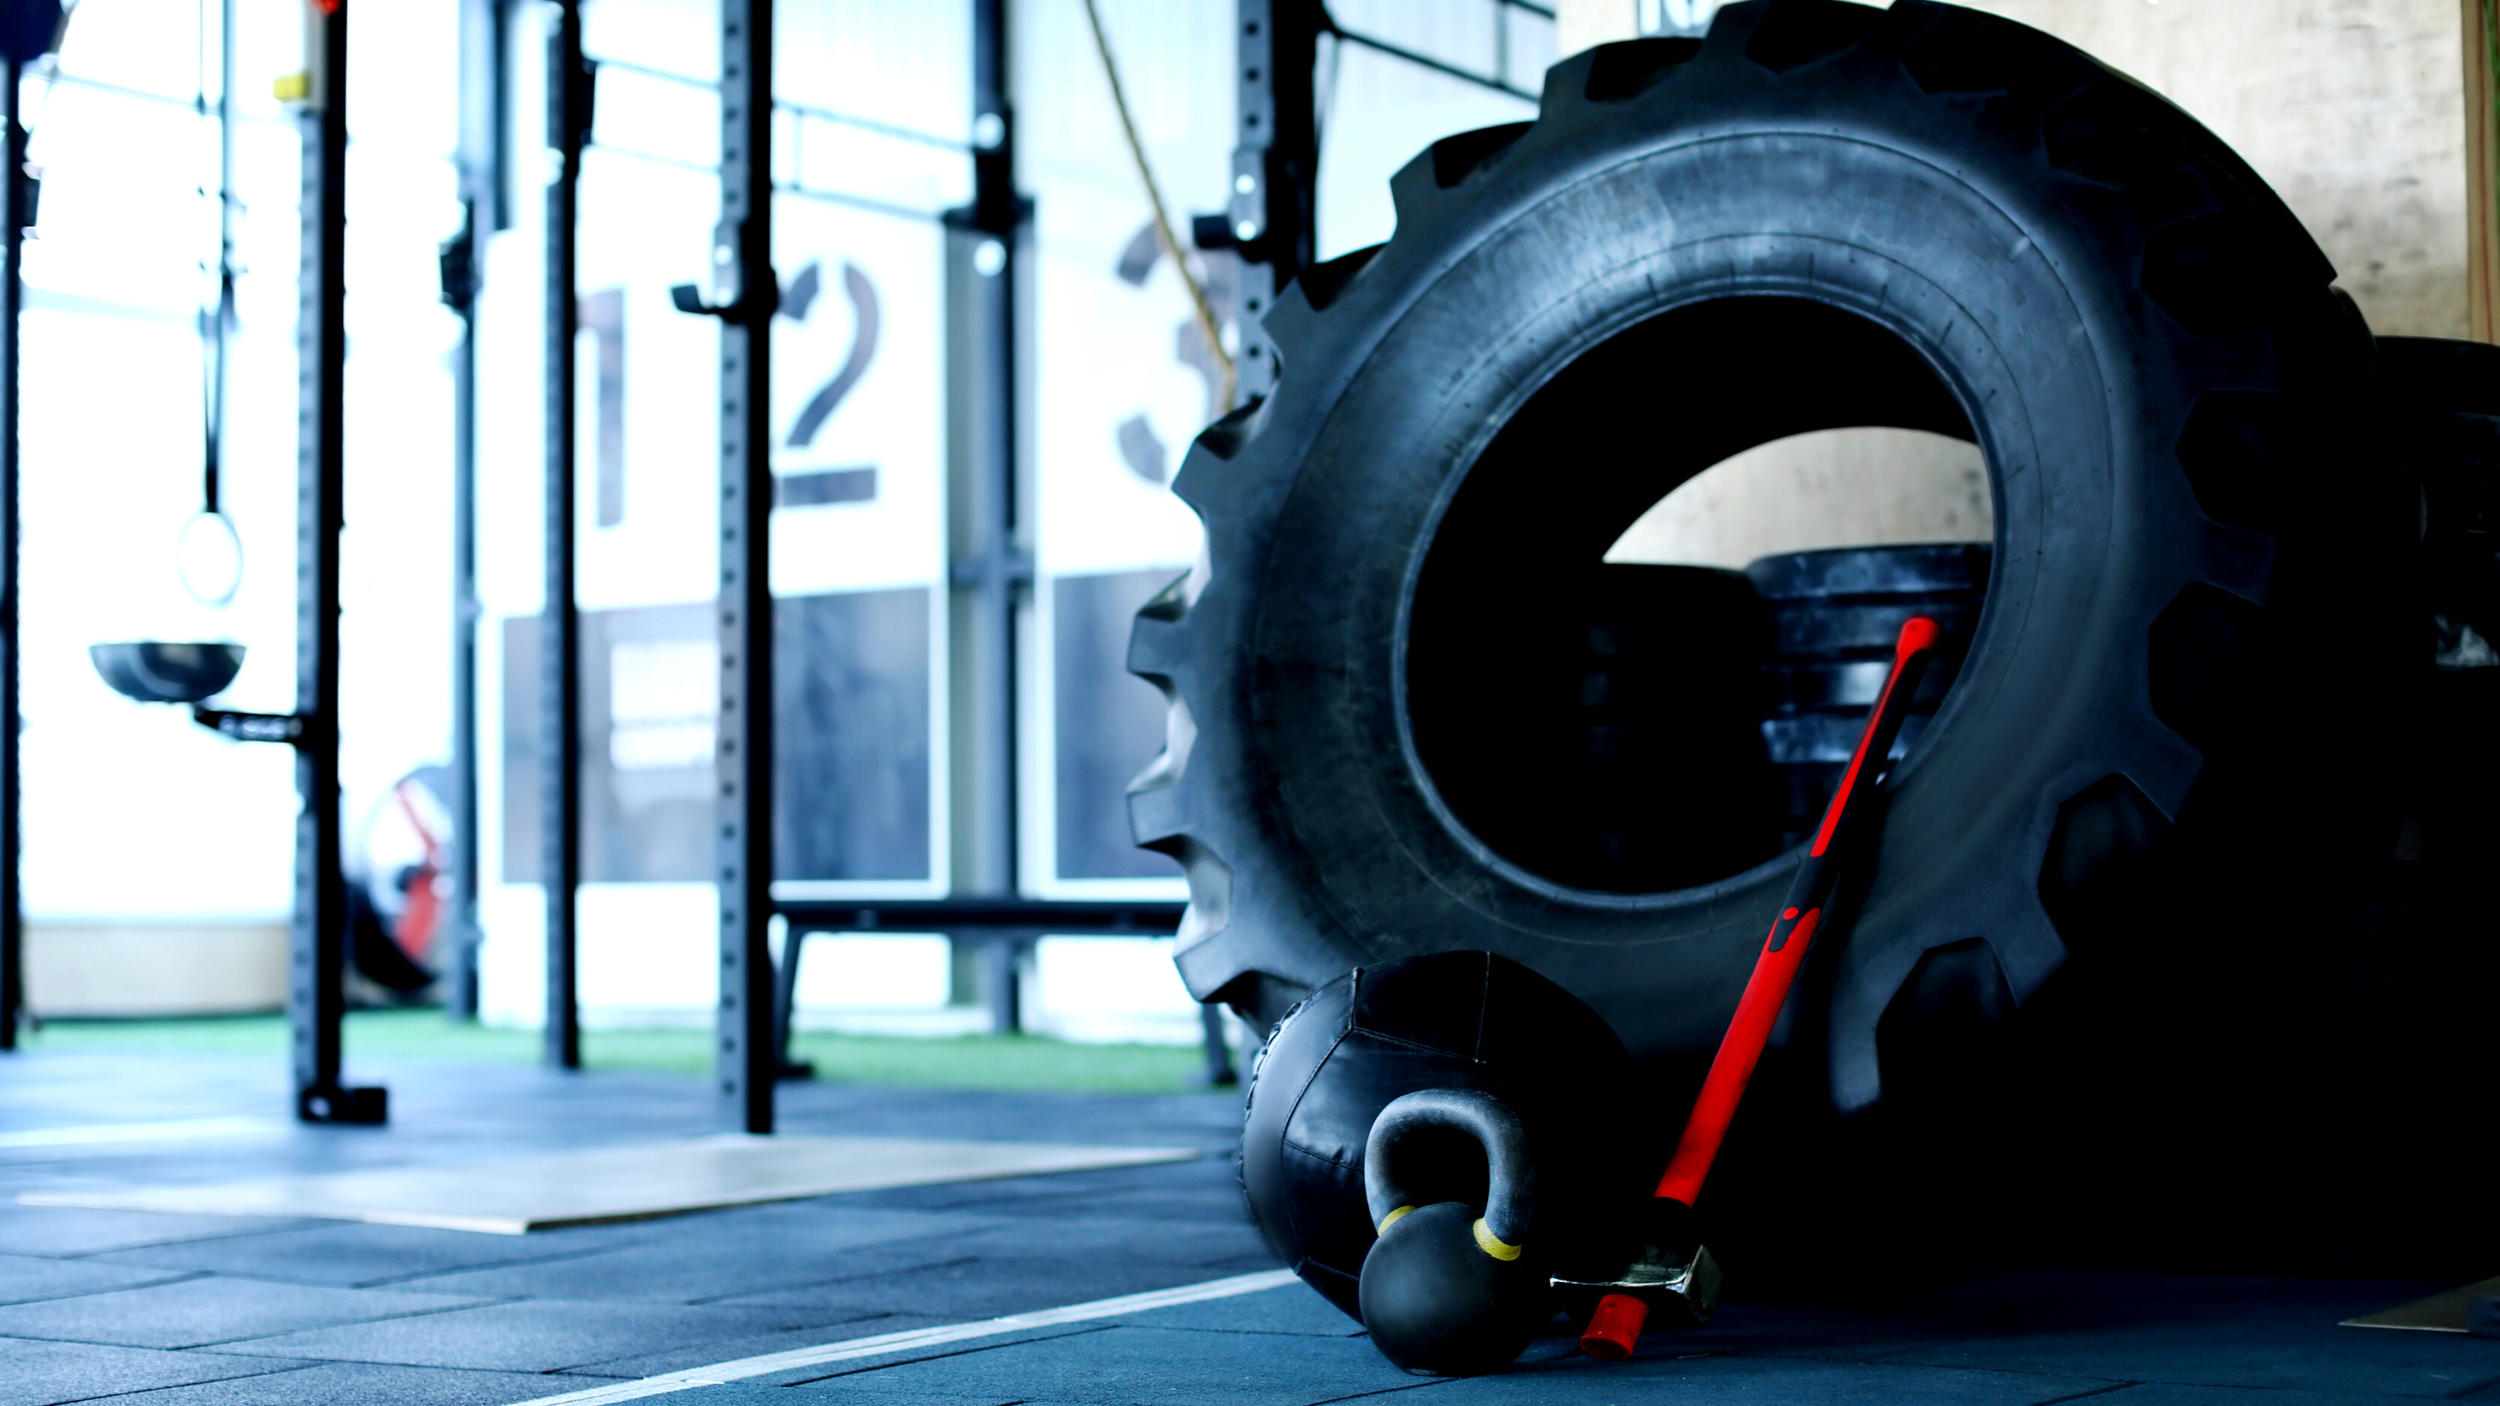 CrossFit vs OrangeTheory (OTF) vs F45: Which is right for you?